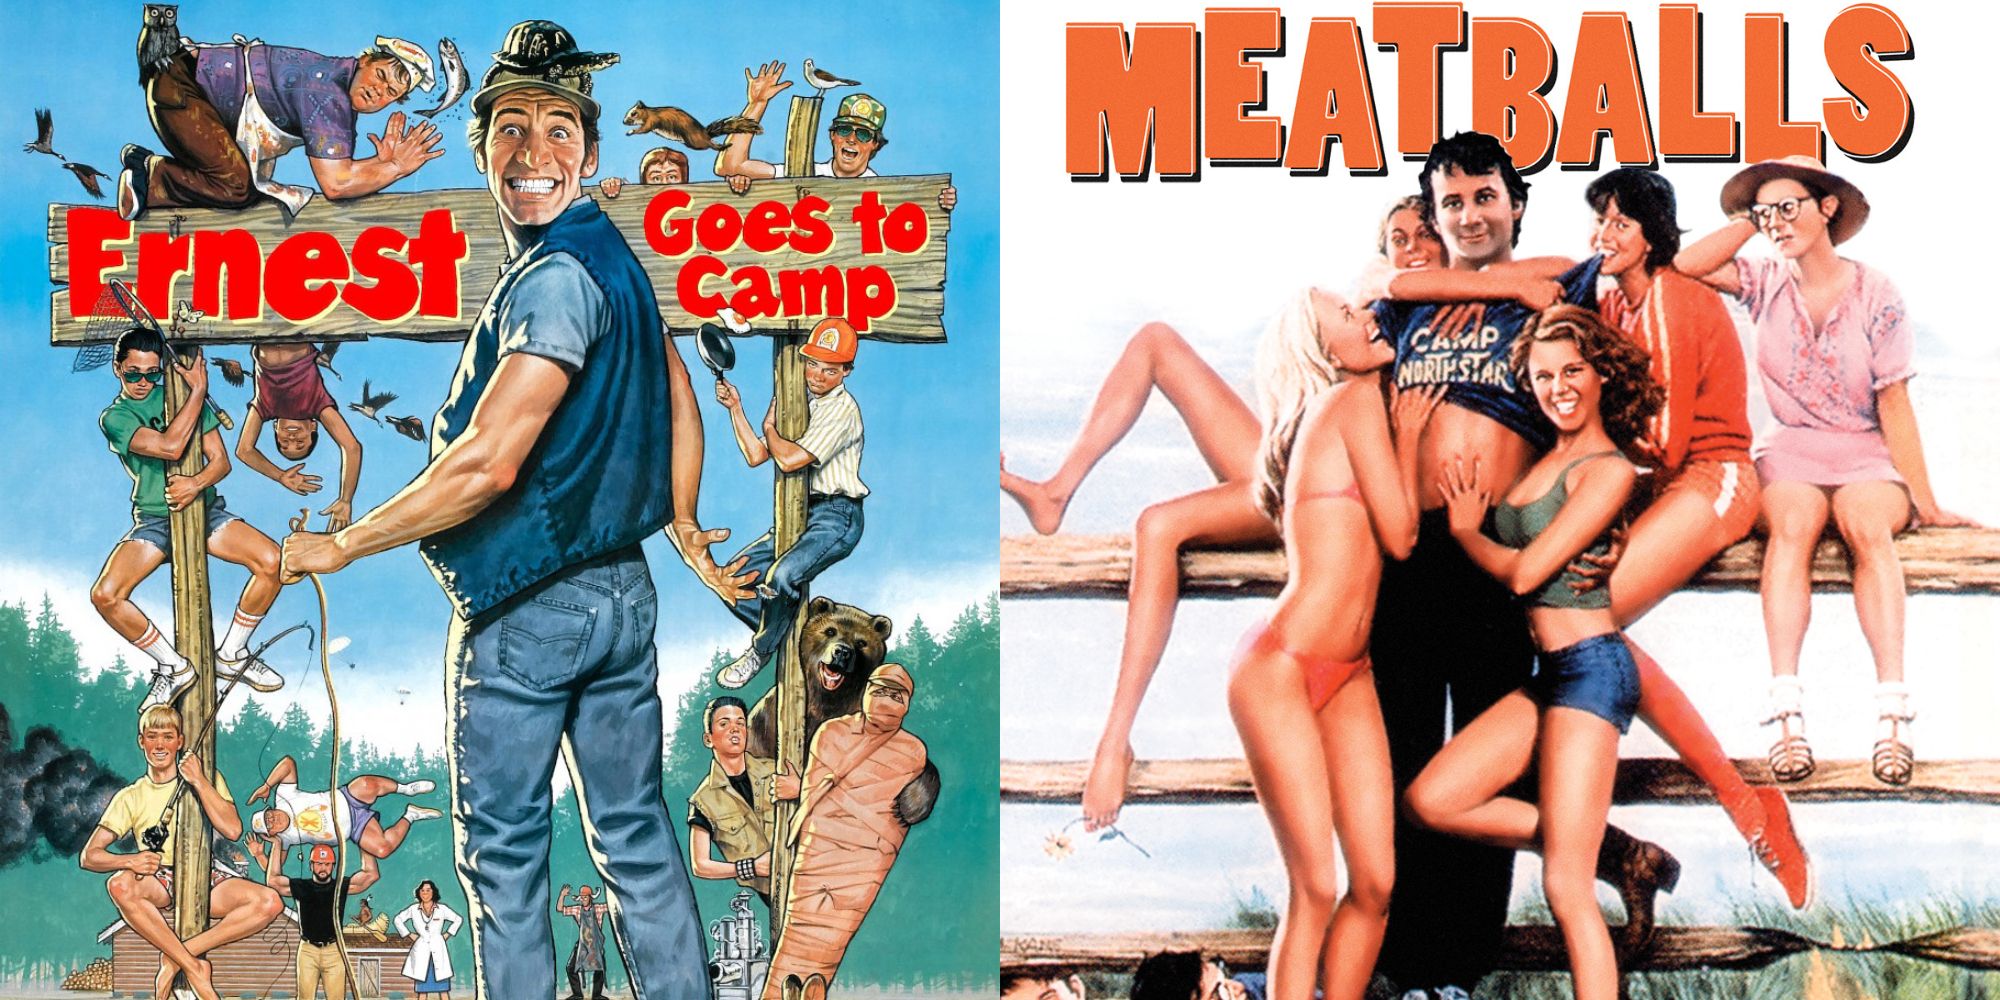 Split image showing posters for Ernest Goes to Camp and Meatballs.